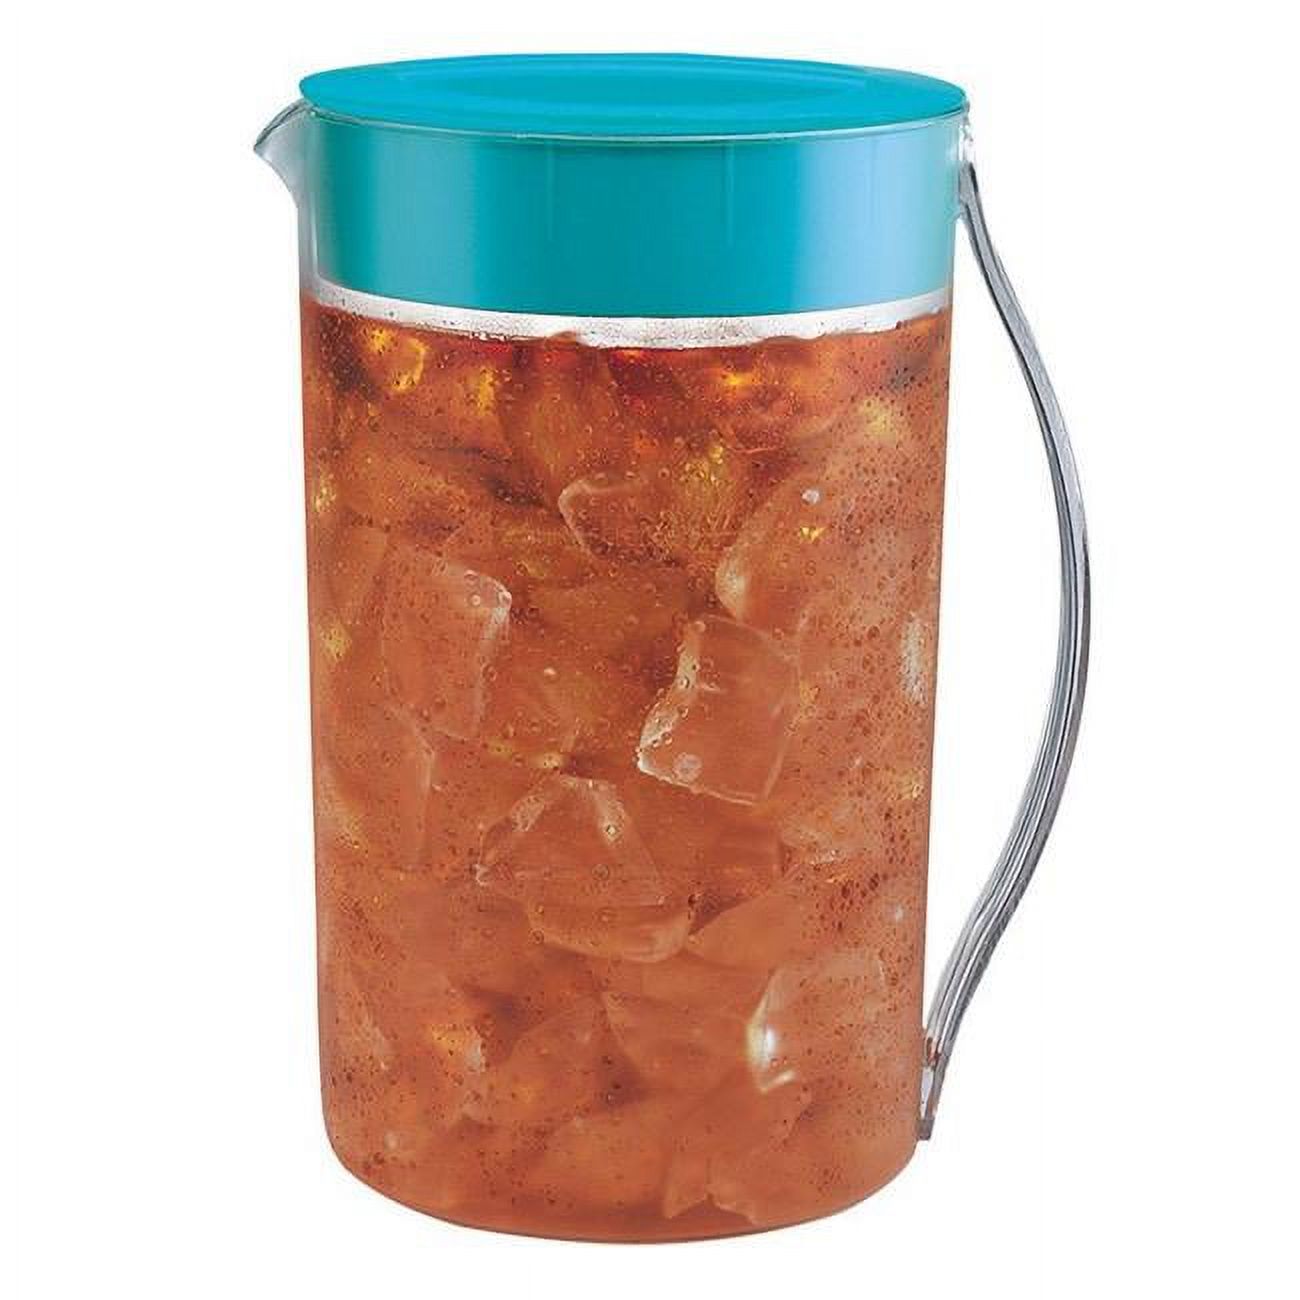 Mr. Coffee TP1-2 Replacement Pitcher For Iced Tea Maker, 2 Quart - image 1 of 1